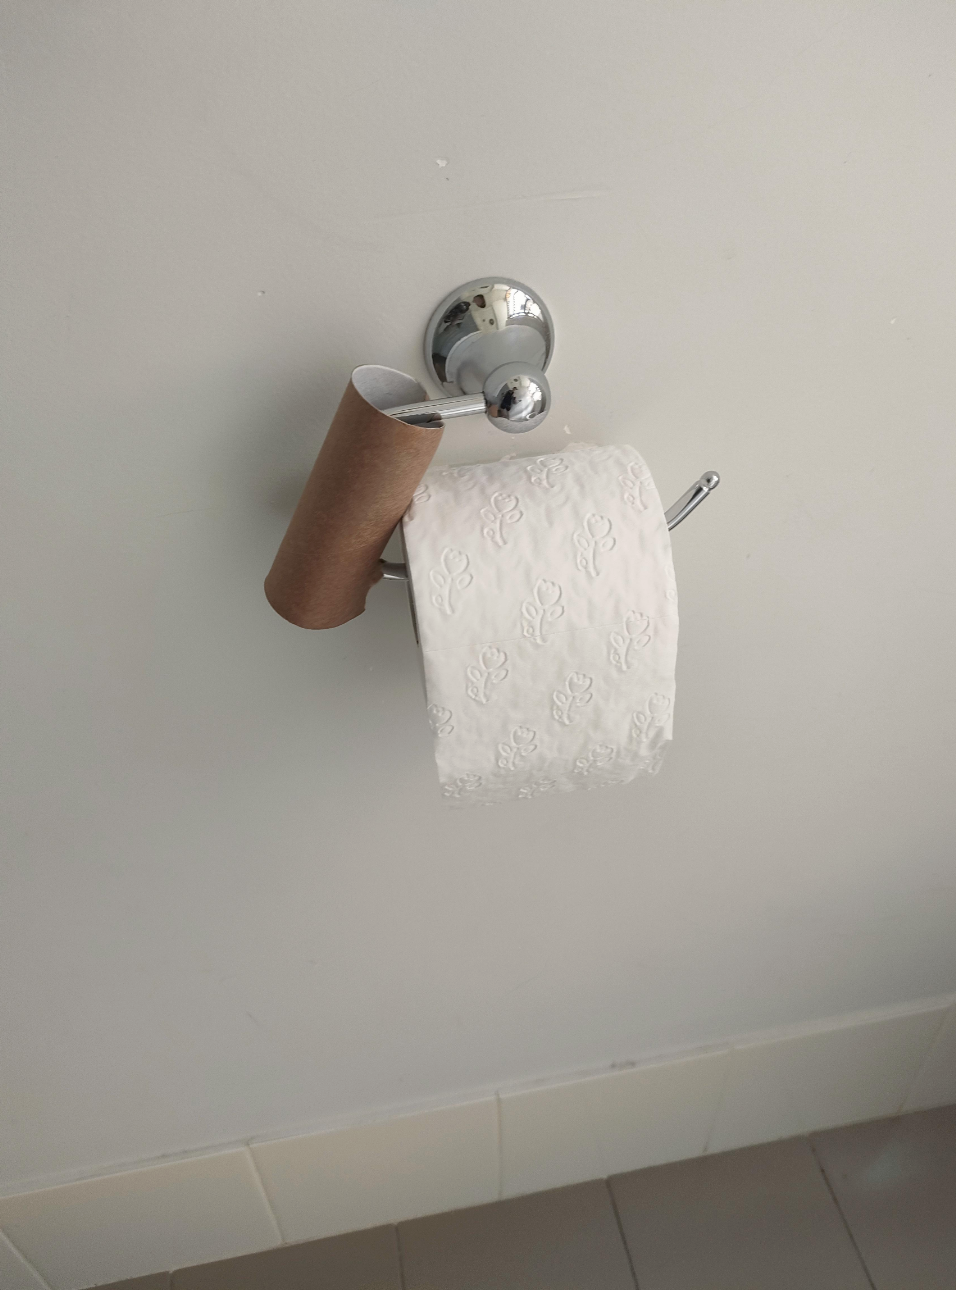 An empty toilet paper roll next to a full one